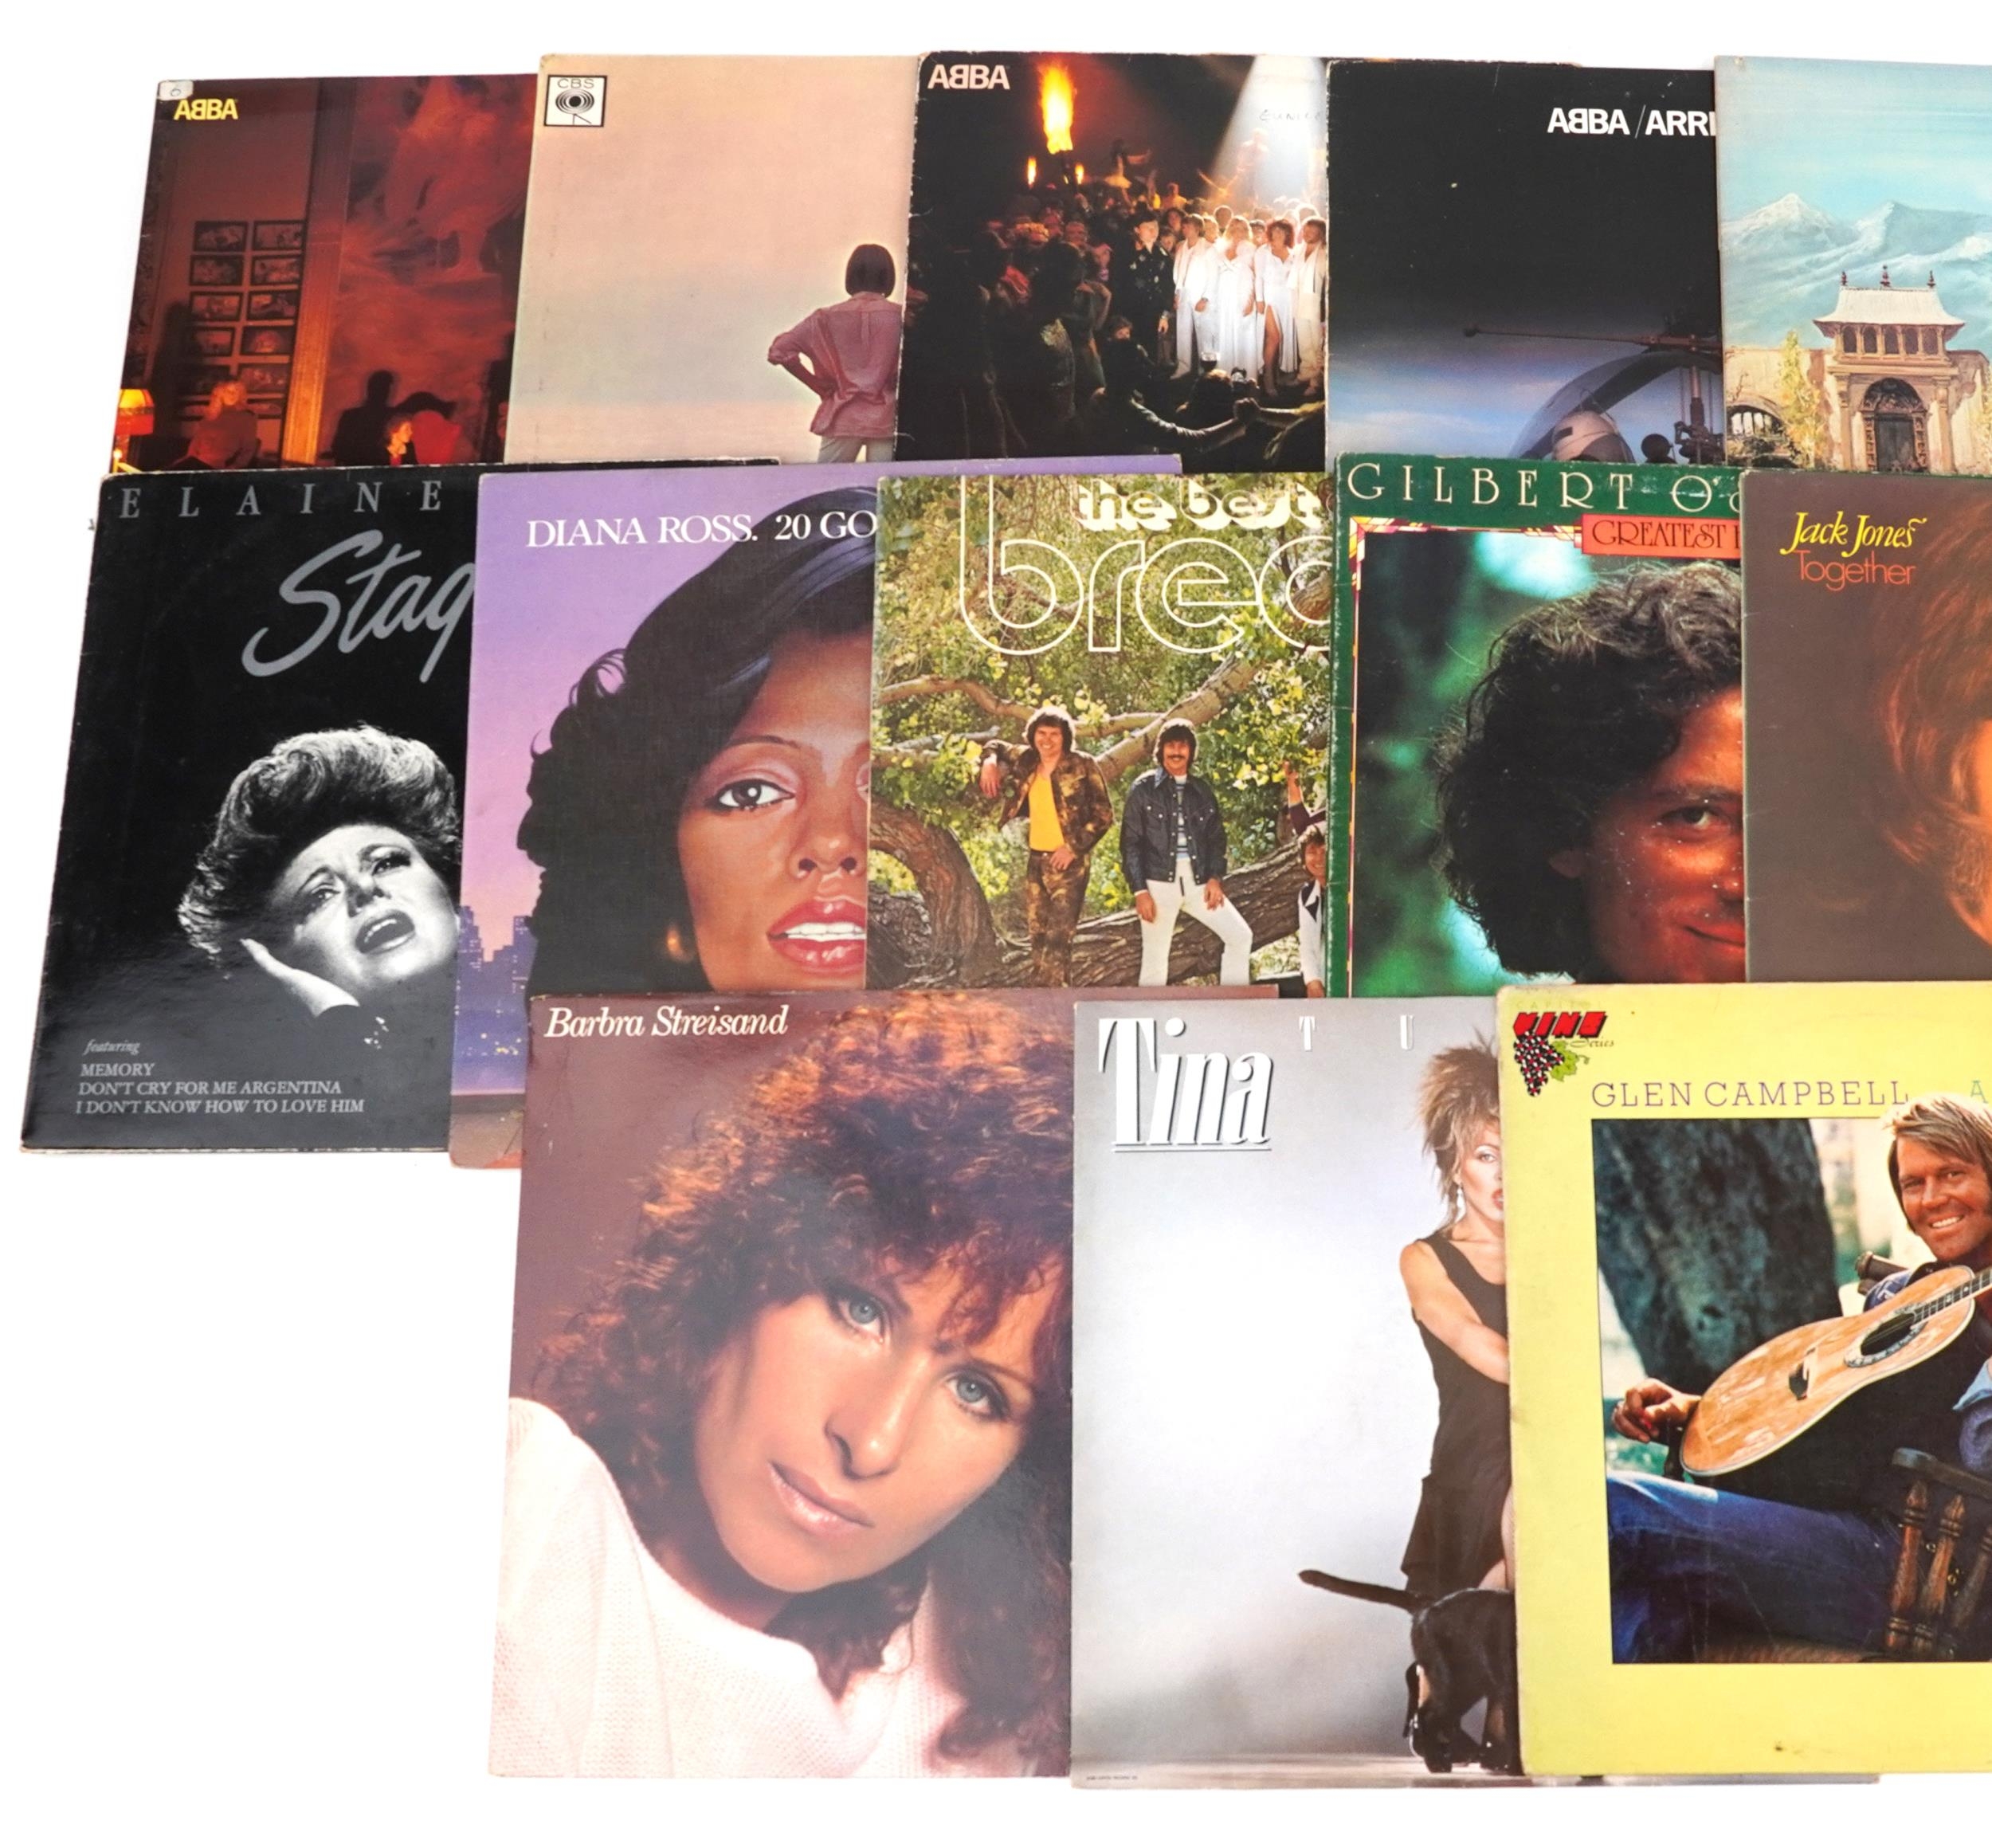 Vinyl LP records including Barbara Streisand, ABBA and Cilla Black - Image 2 of 3